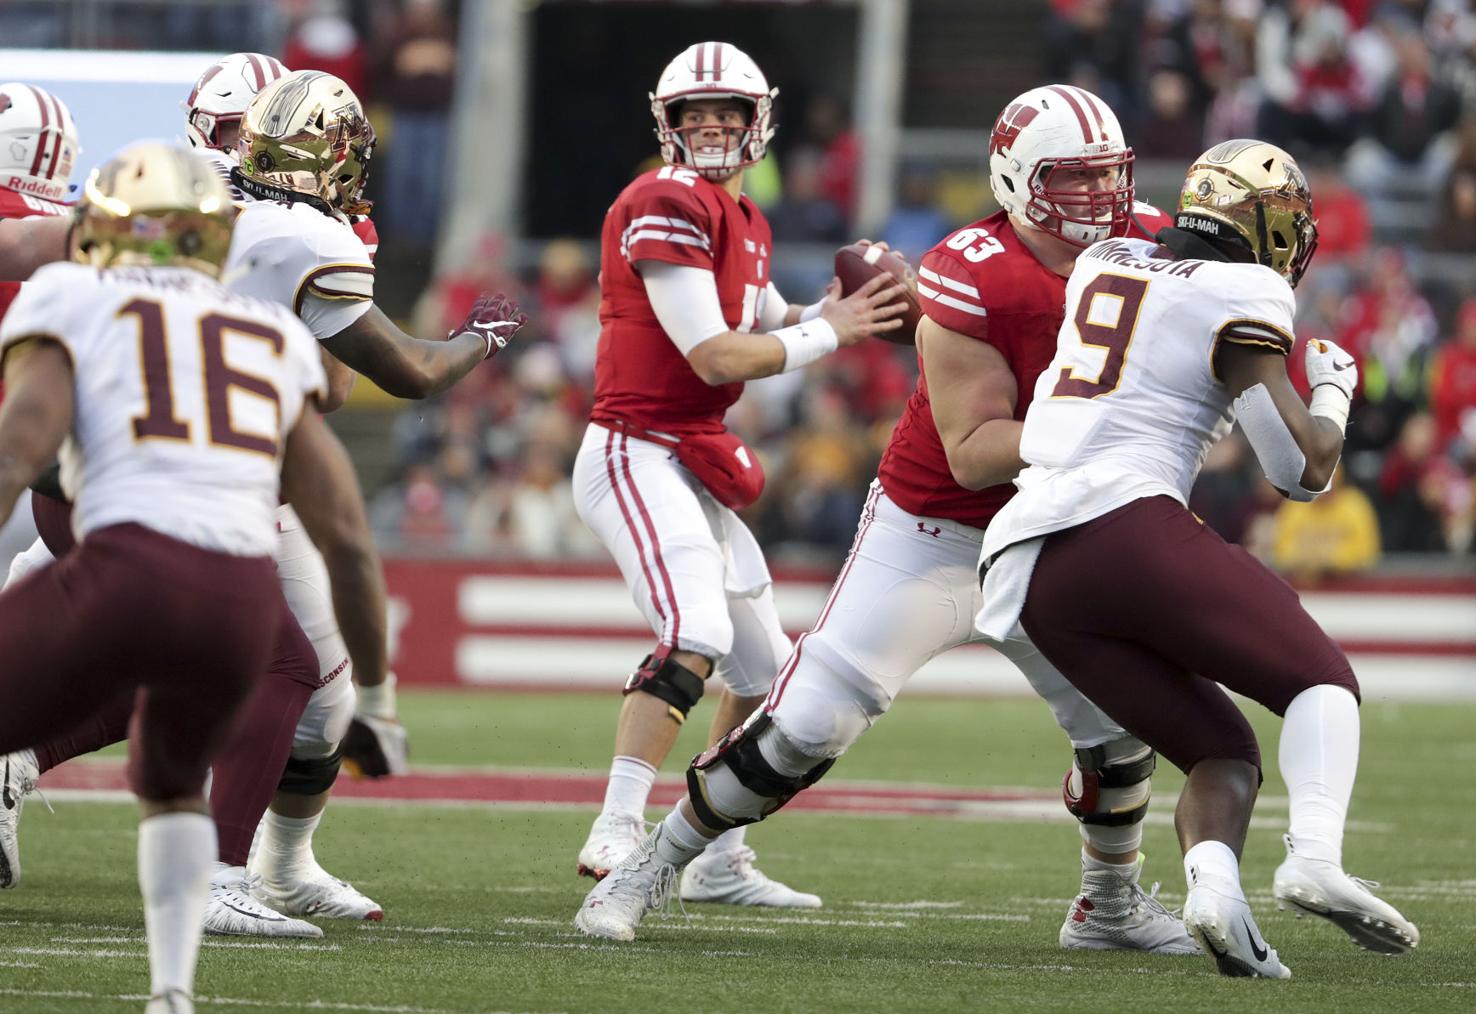 Get an early look at Wisconsin Badgers' projected depth chart for next